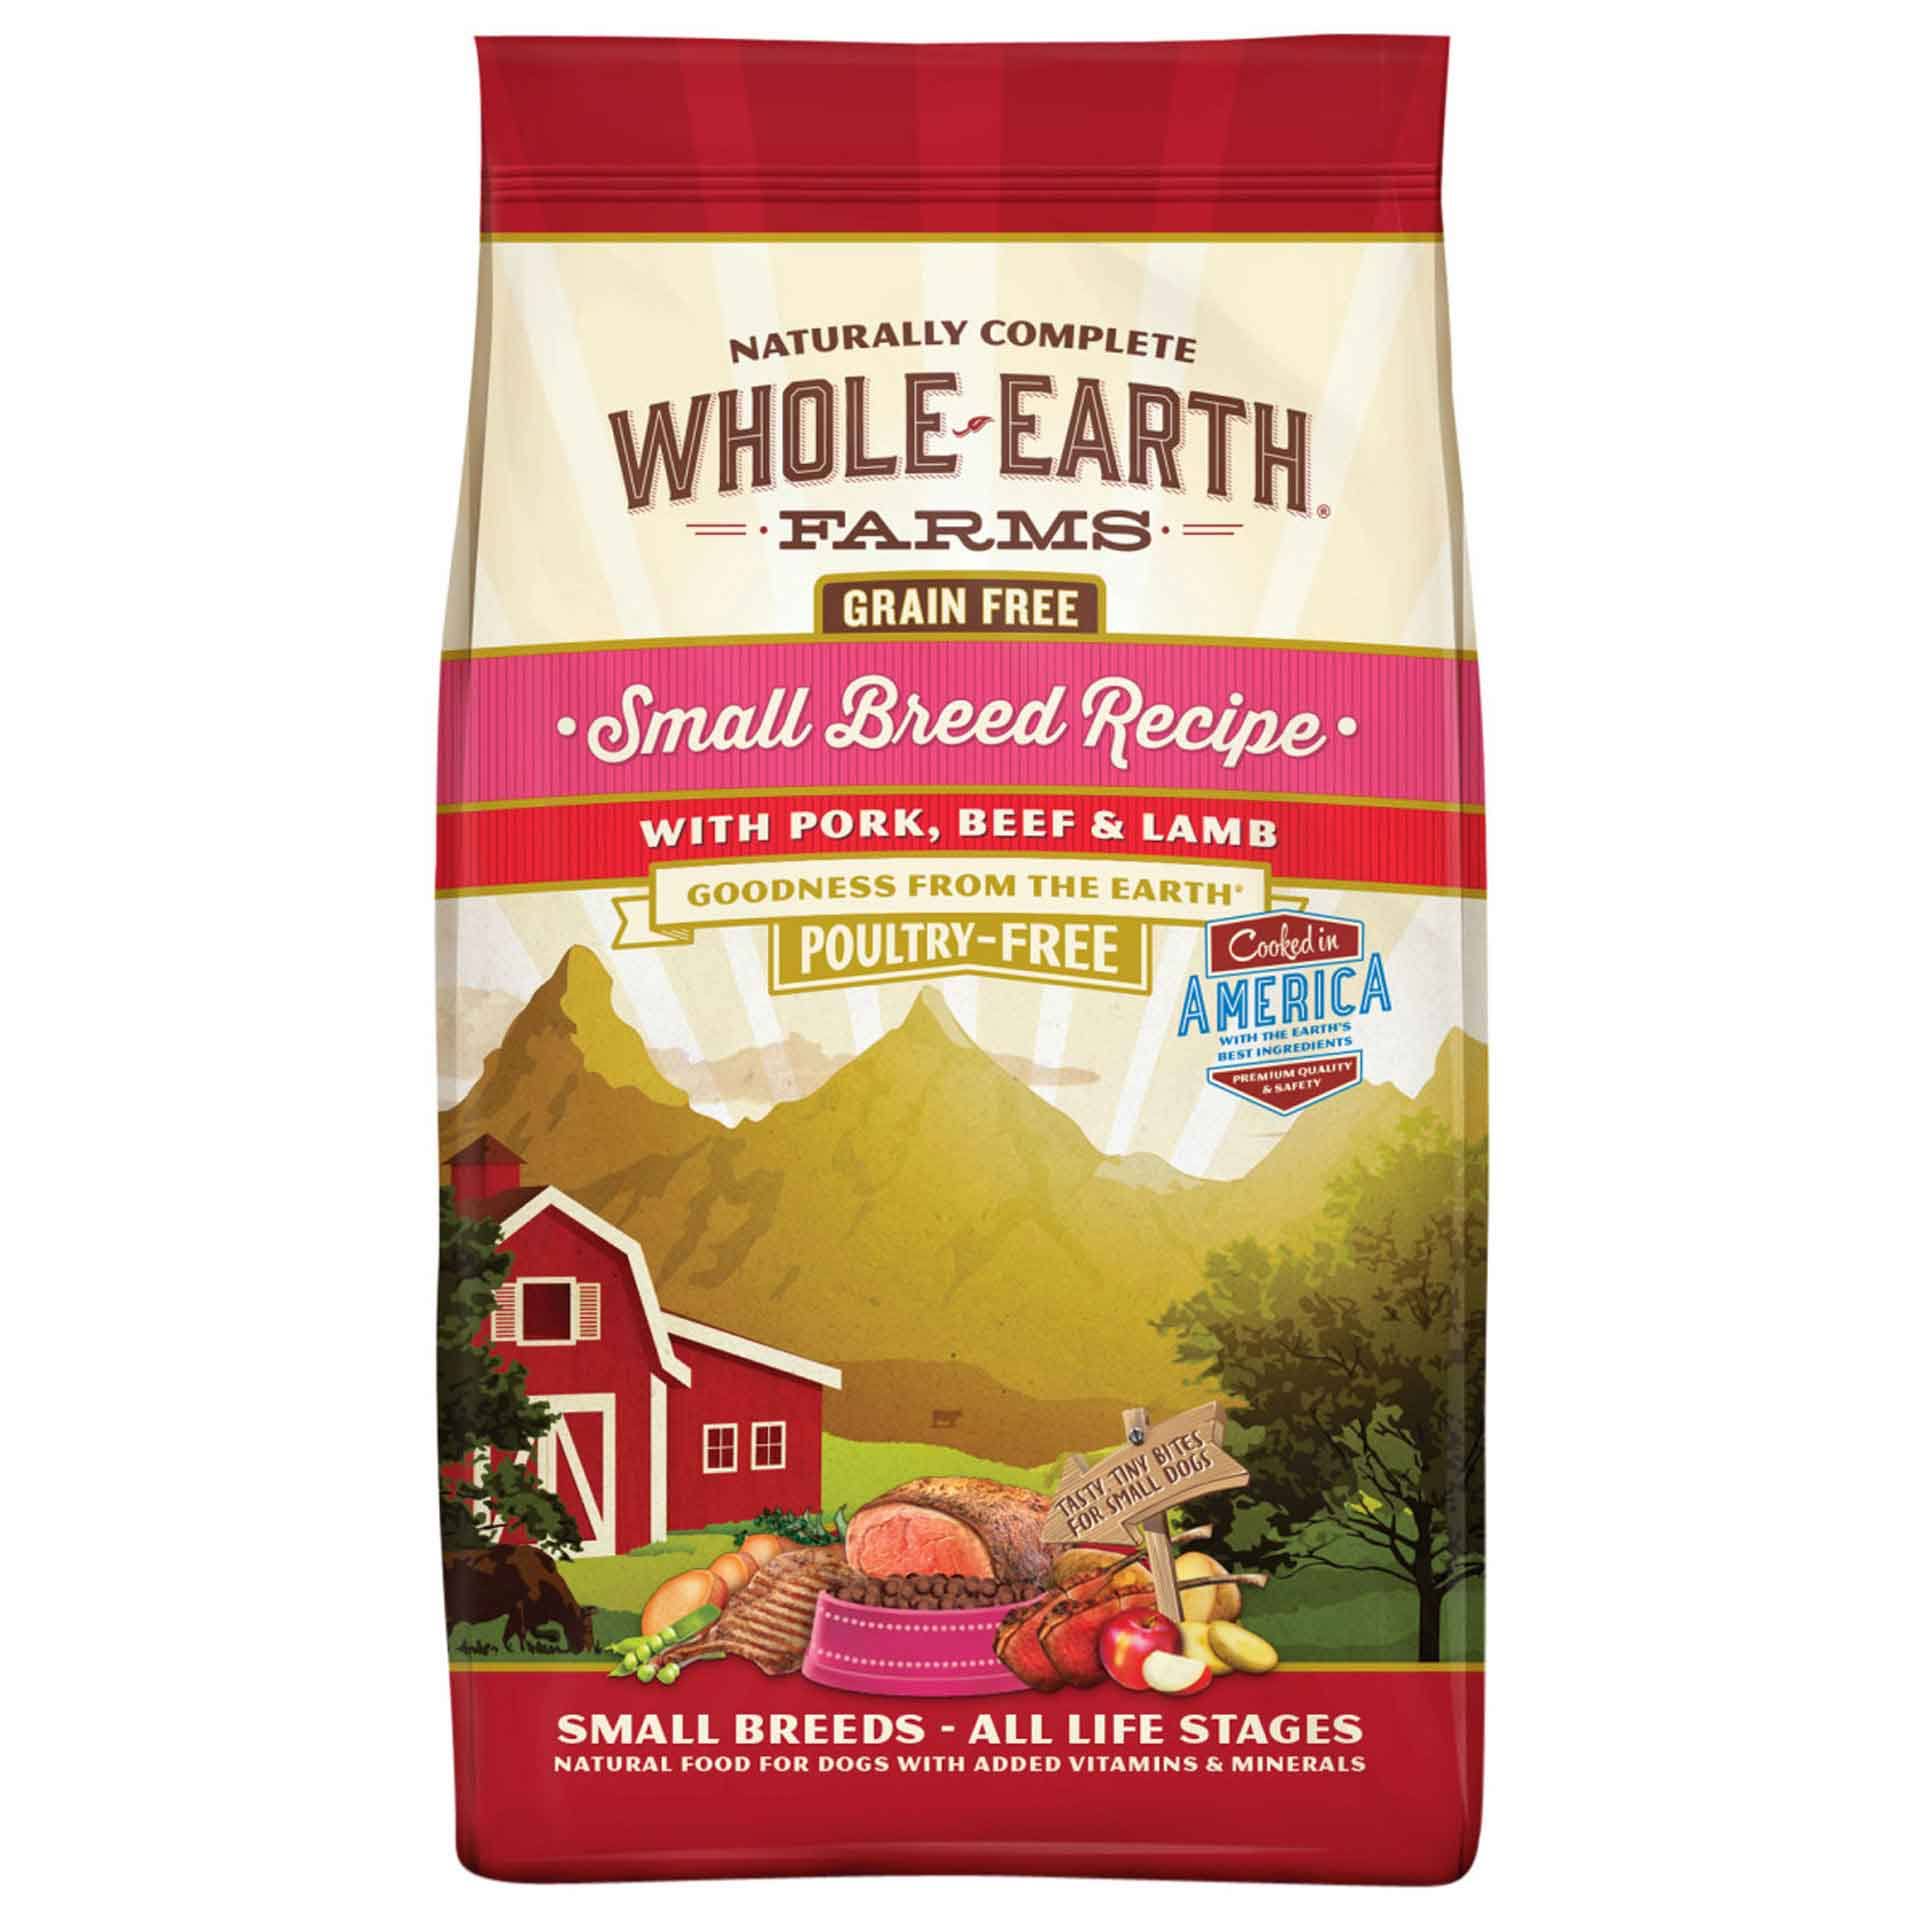 Whole Earth Farms Grain Free Small Breed Recipe with Pork, Beef & Lamb Dry Dog Food, 12 lbs.